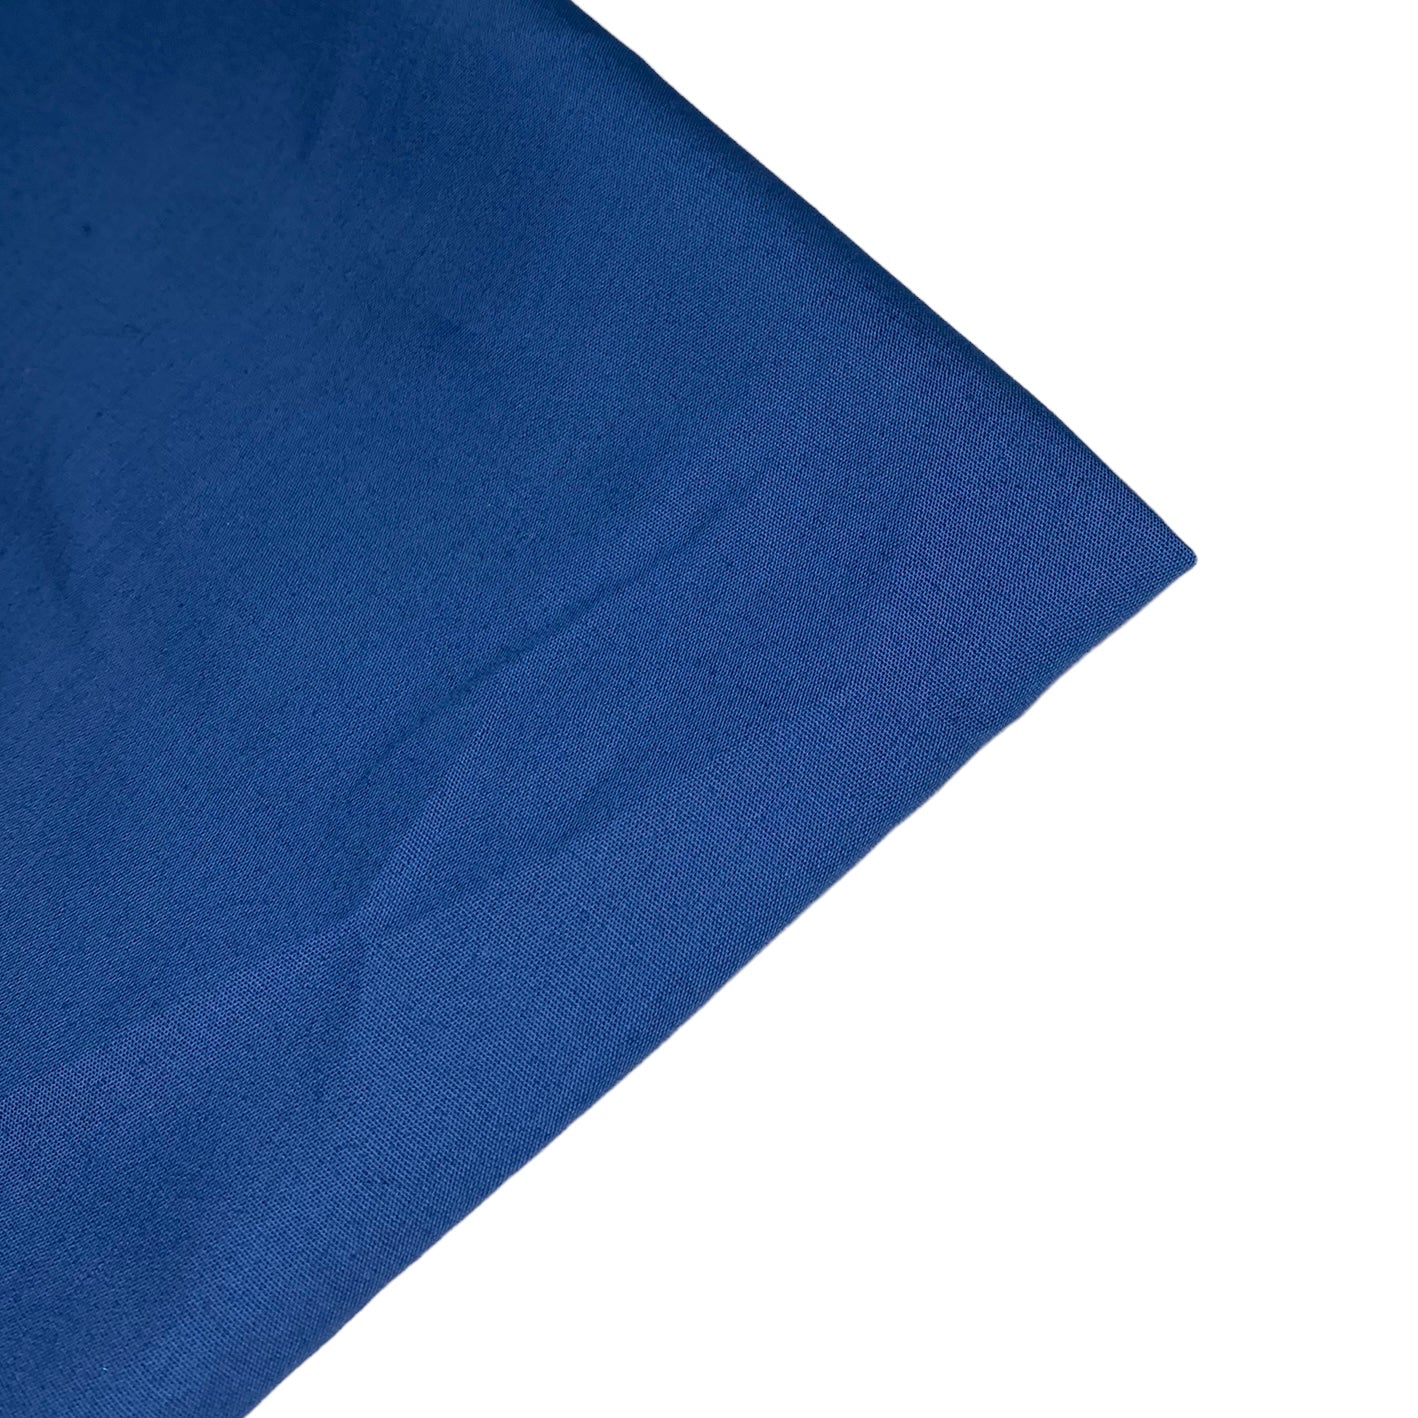 Polyester/Cotton Broadcloth - 60” - Blue